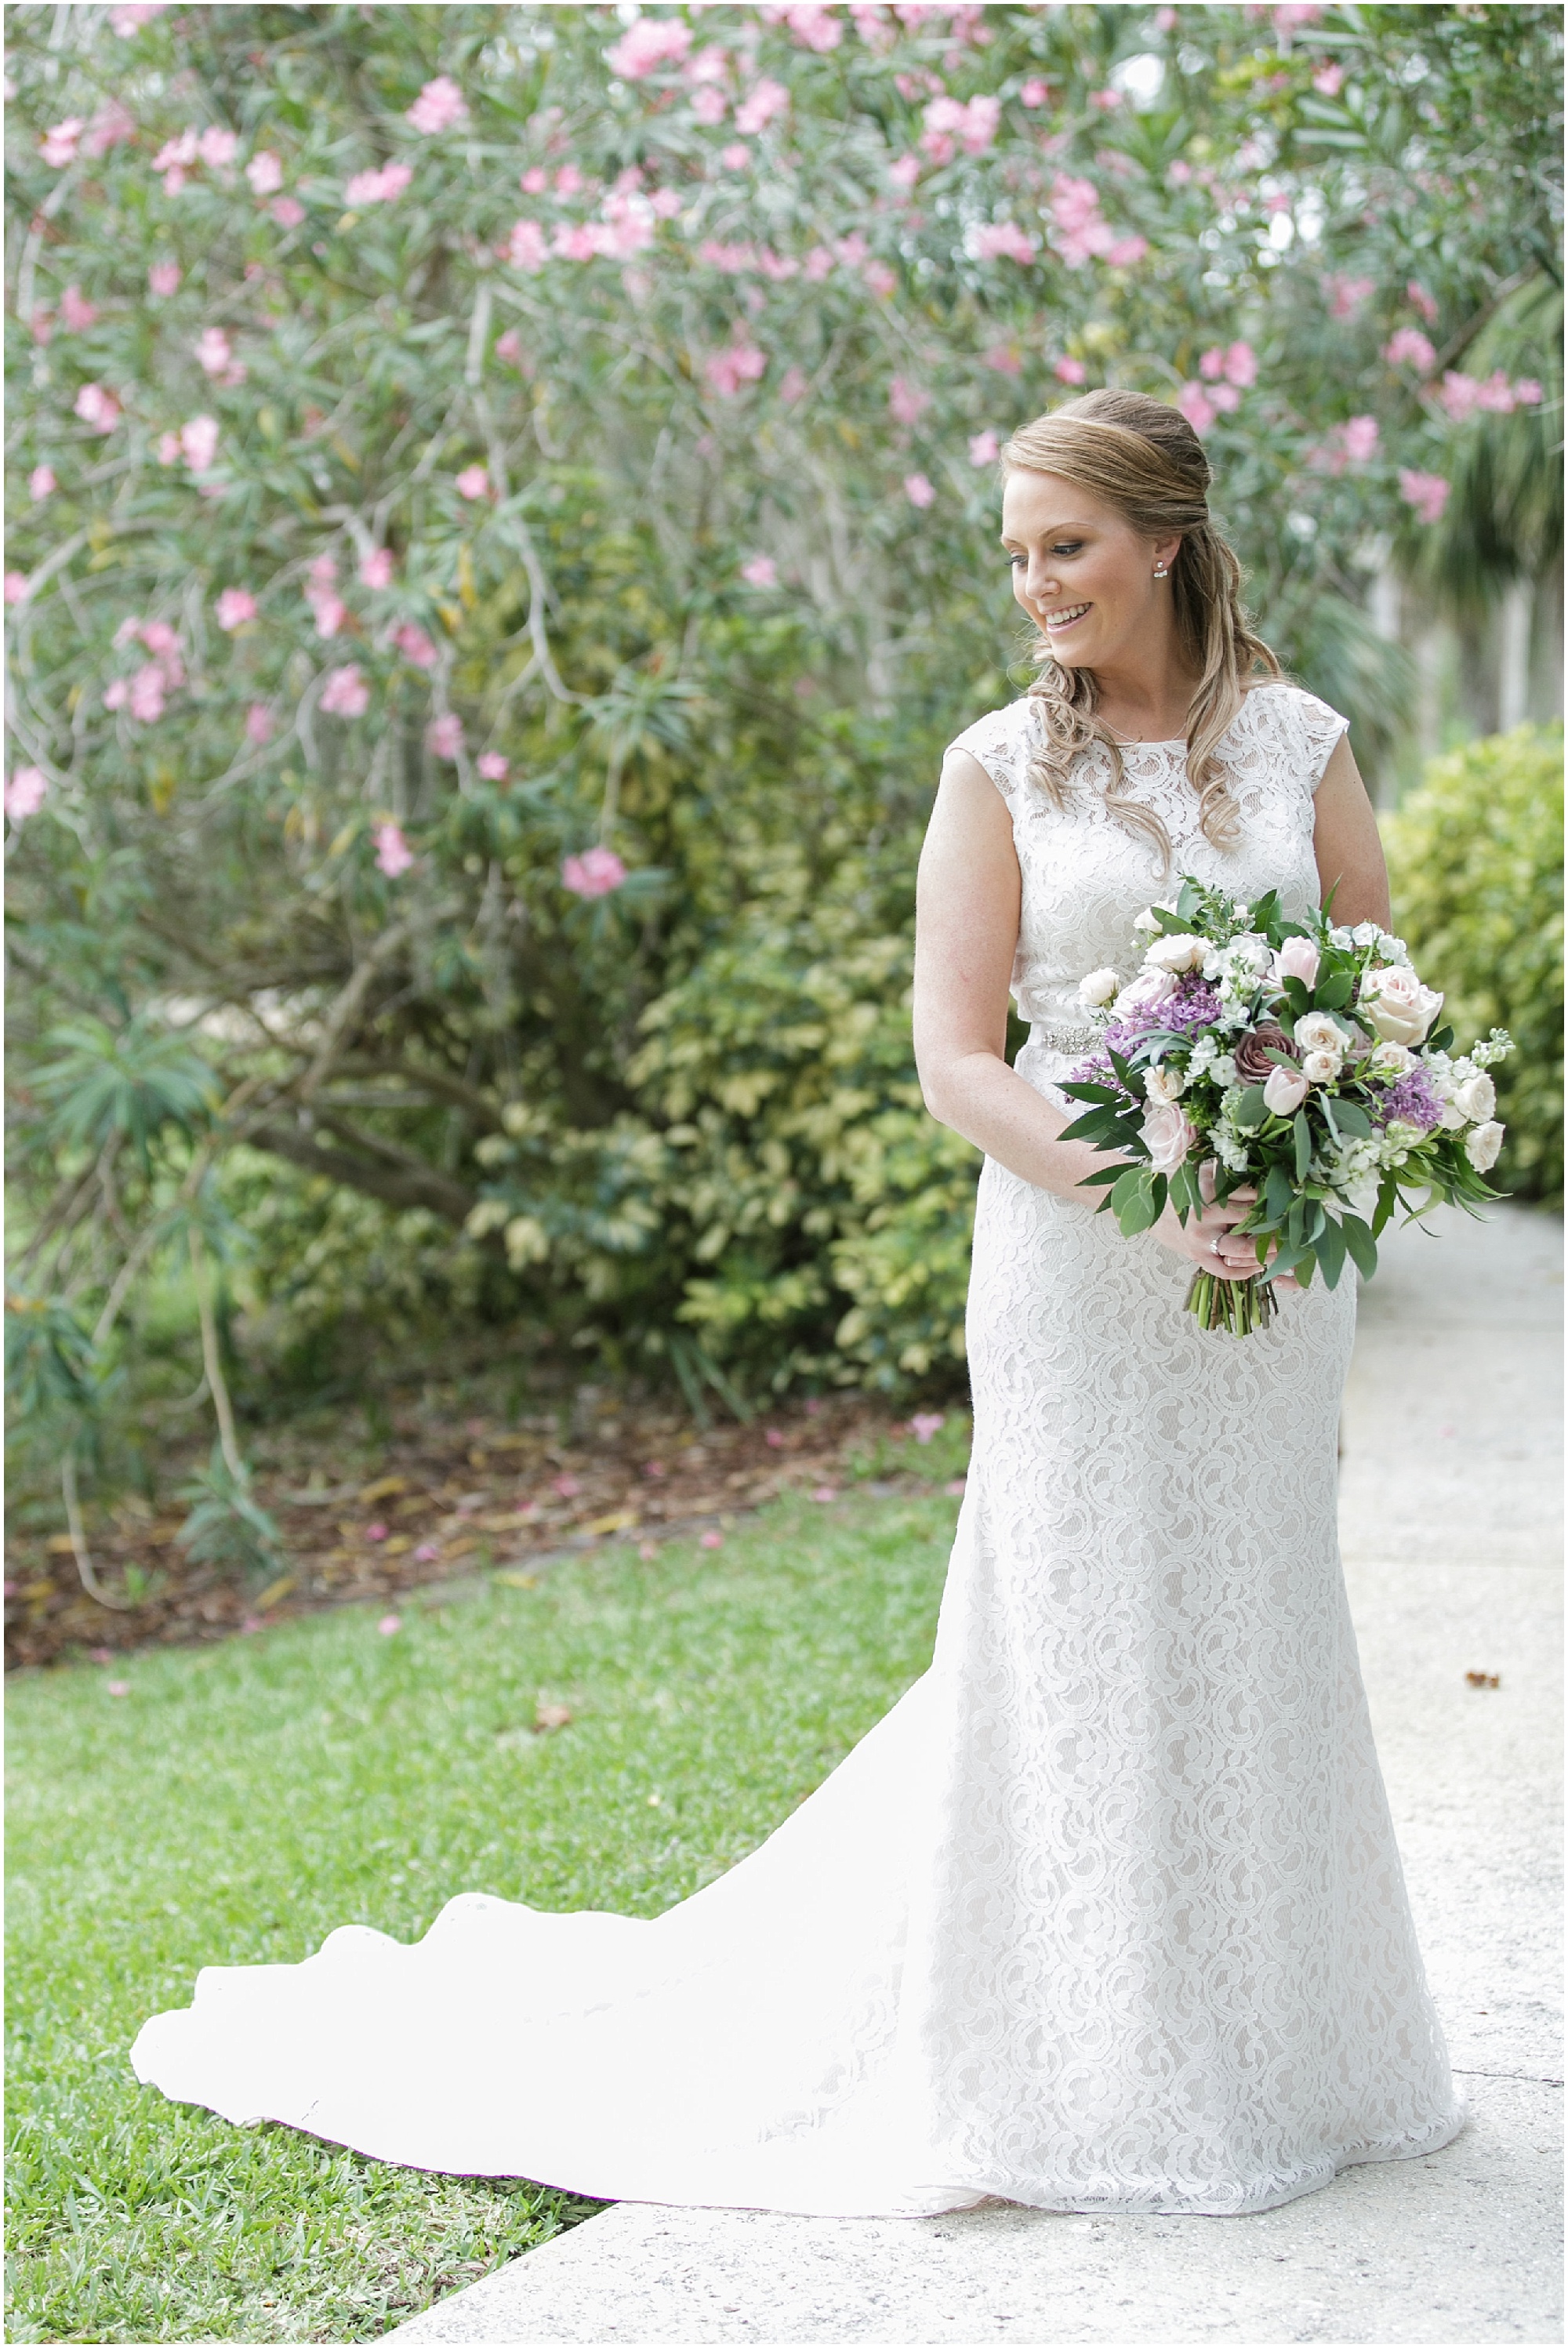 Full photo of a bride standing in the garden in her white wedding dress.